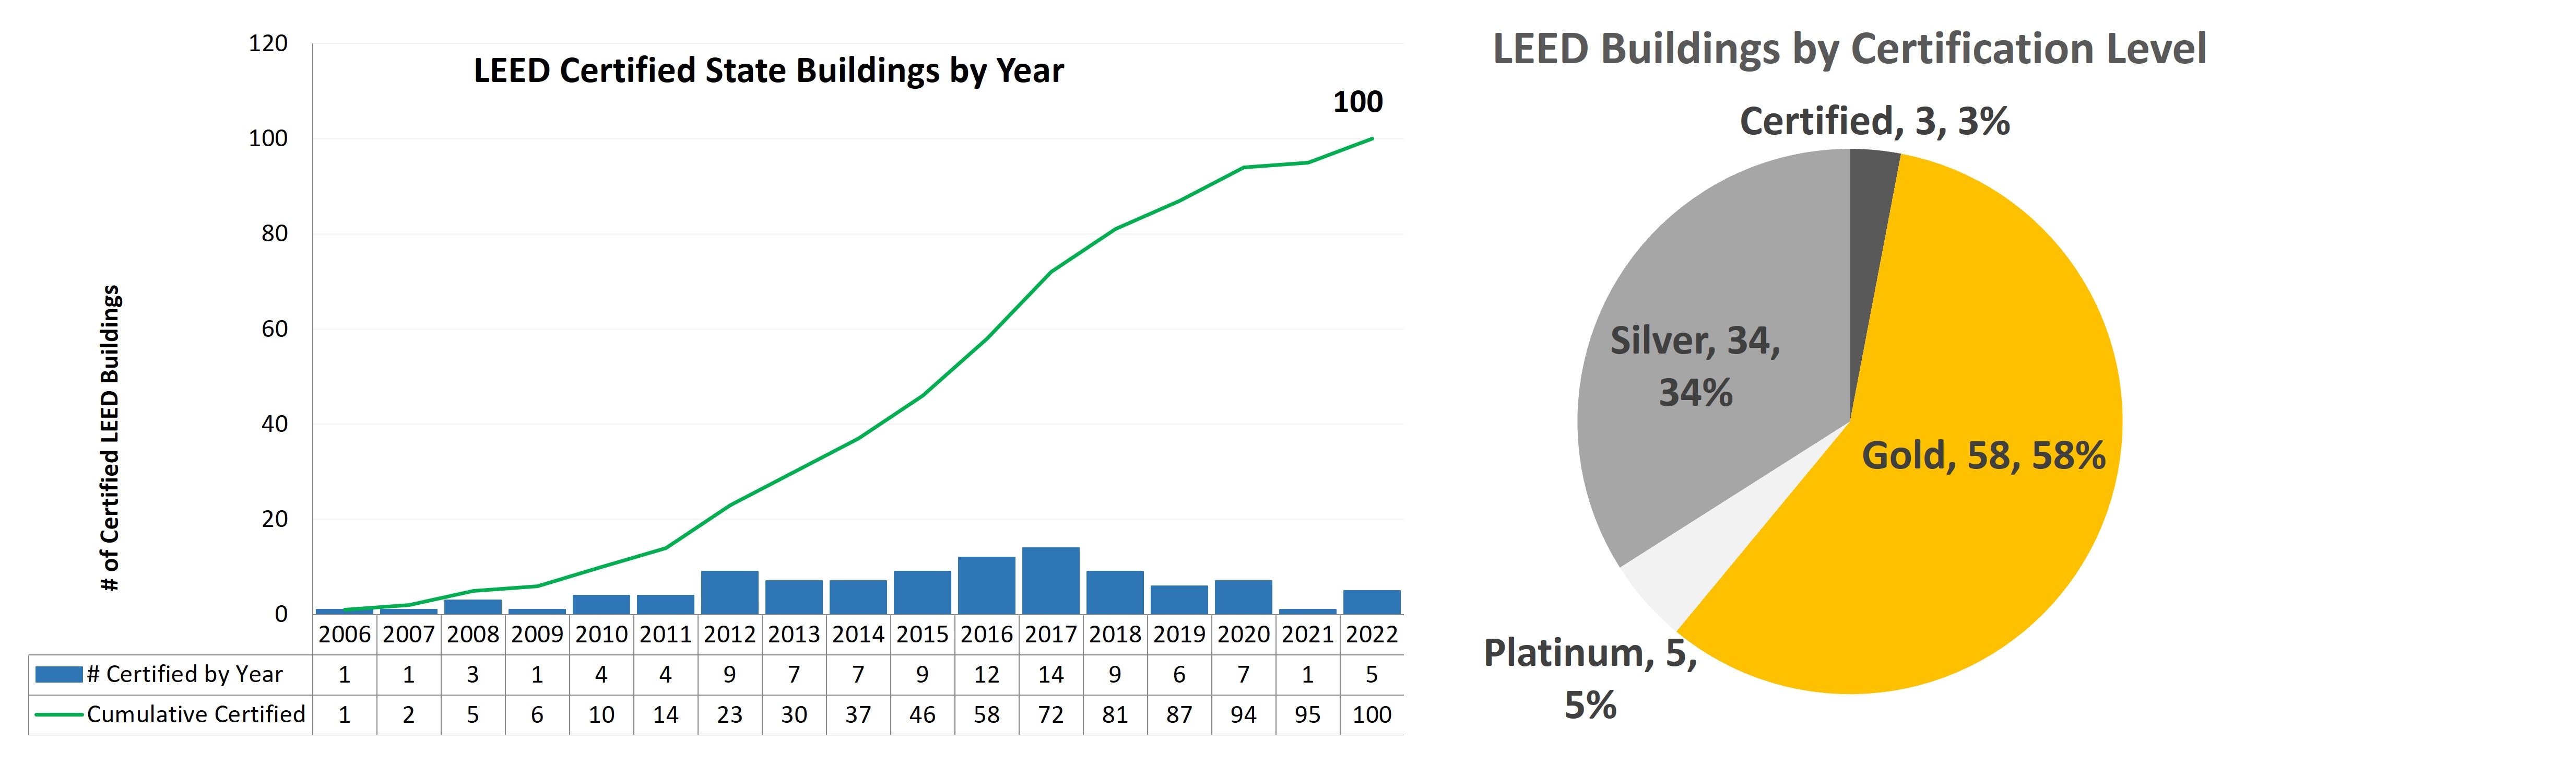 As of December 2022, 100 buildings in the LBE portfolio have achieved LEED certification, 5 at the Platinum level, 58 Gold, 34 Silver, and 3 Certified. 